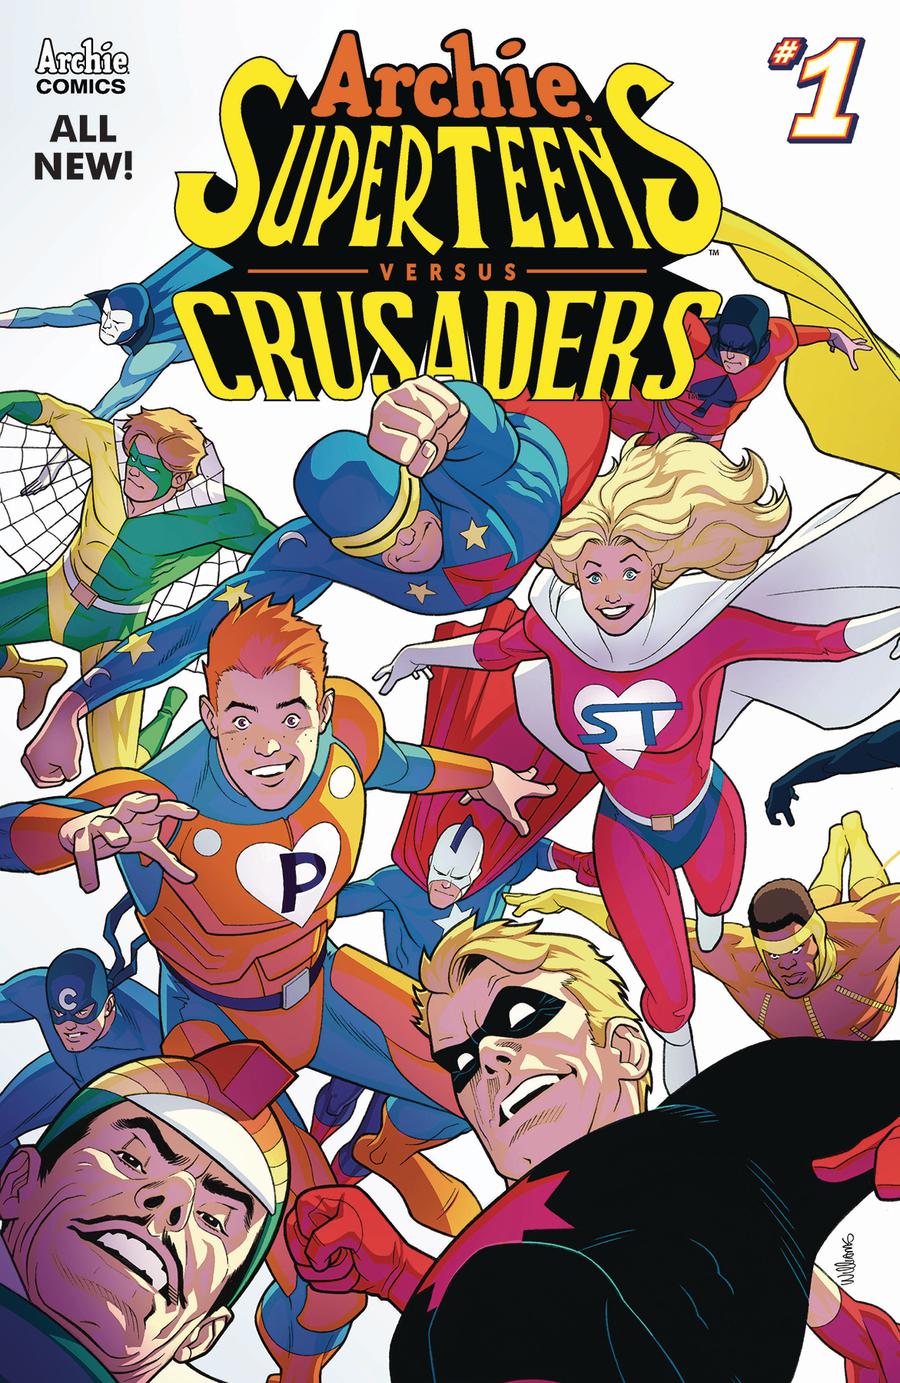 Archie Superteens Versus Crusaders #1 Cover A Regular Kelsey Shannon Connecting Cover (1 Of 2)